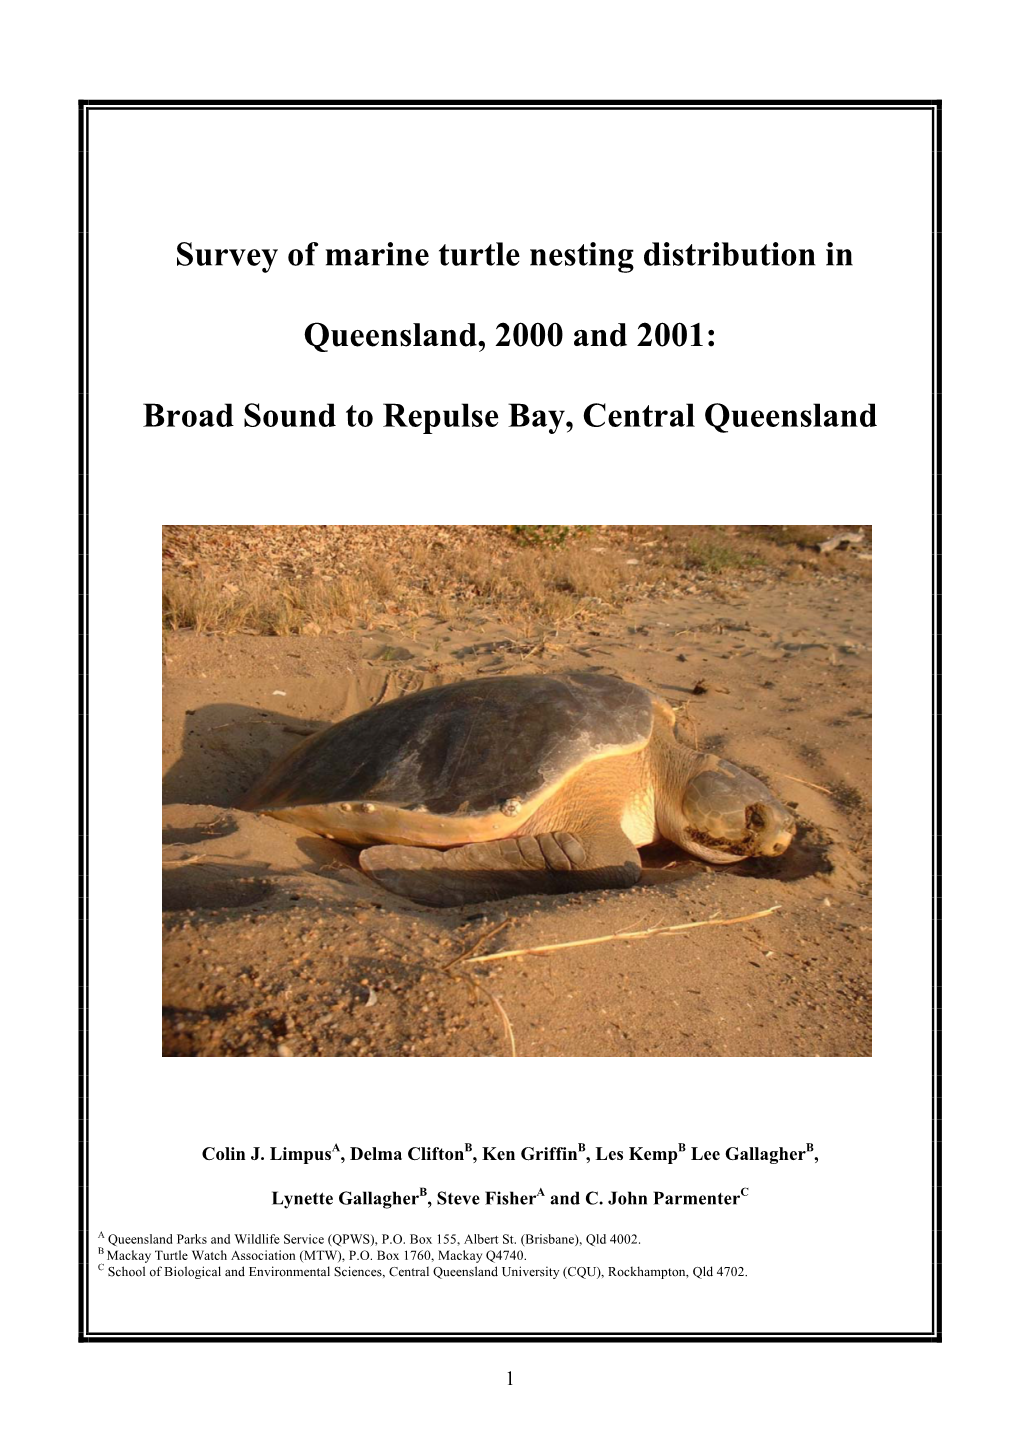 Survey of Marine Turtle Nesting Distribution in Queensland, 2000 and 2001